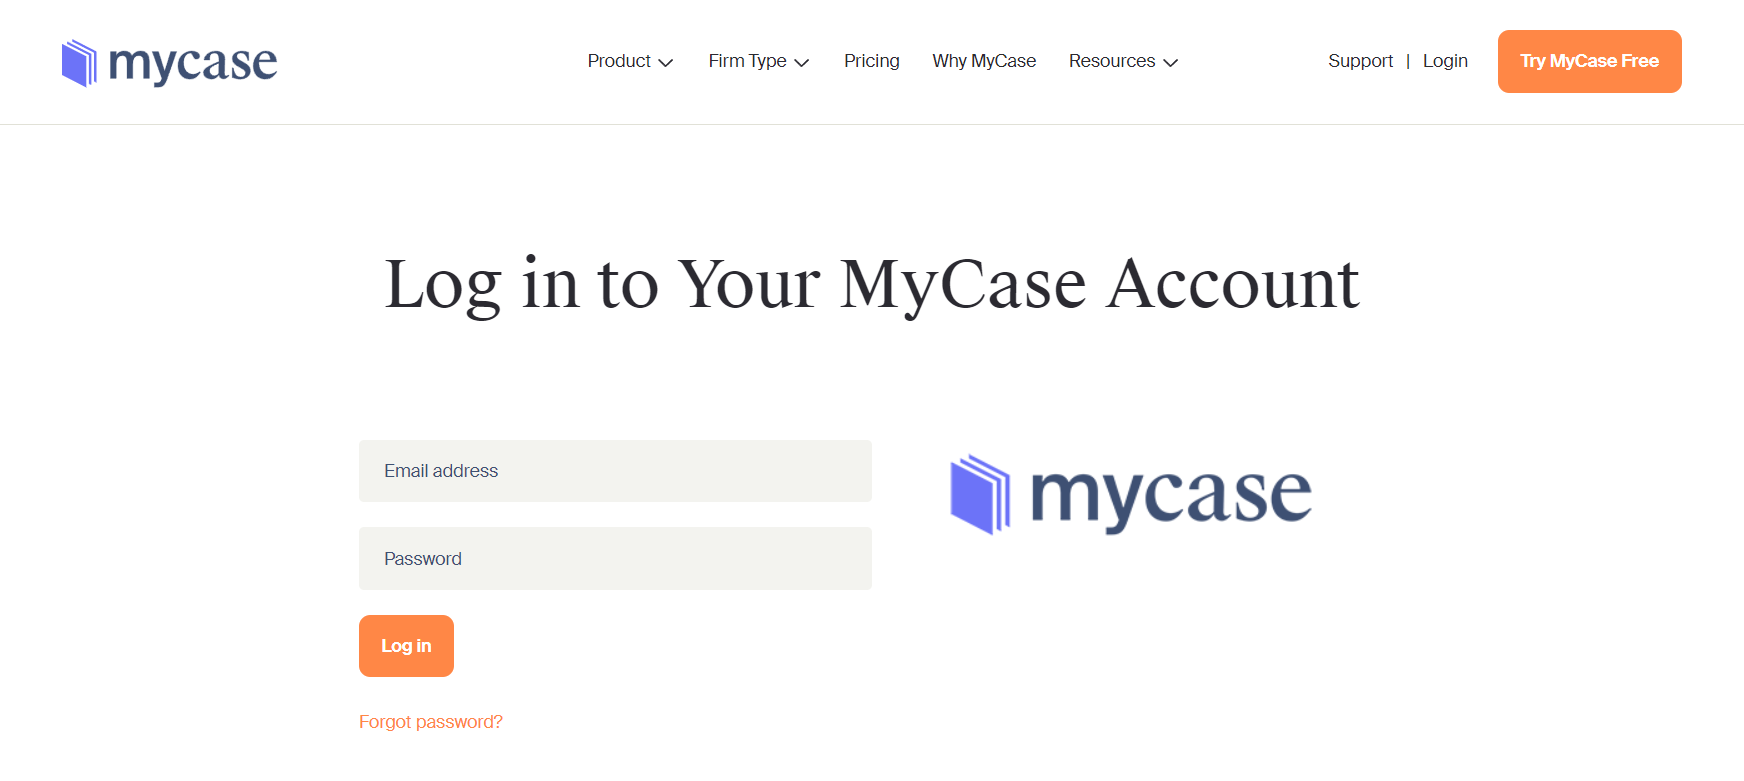 Logging Into Your MyCase Account at www.mycase.com/login